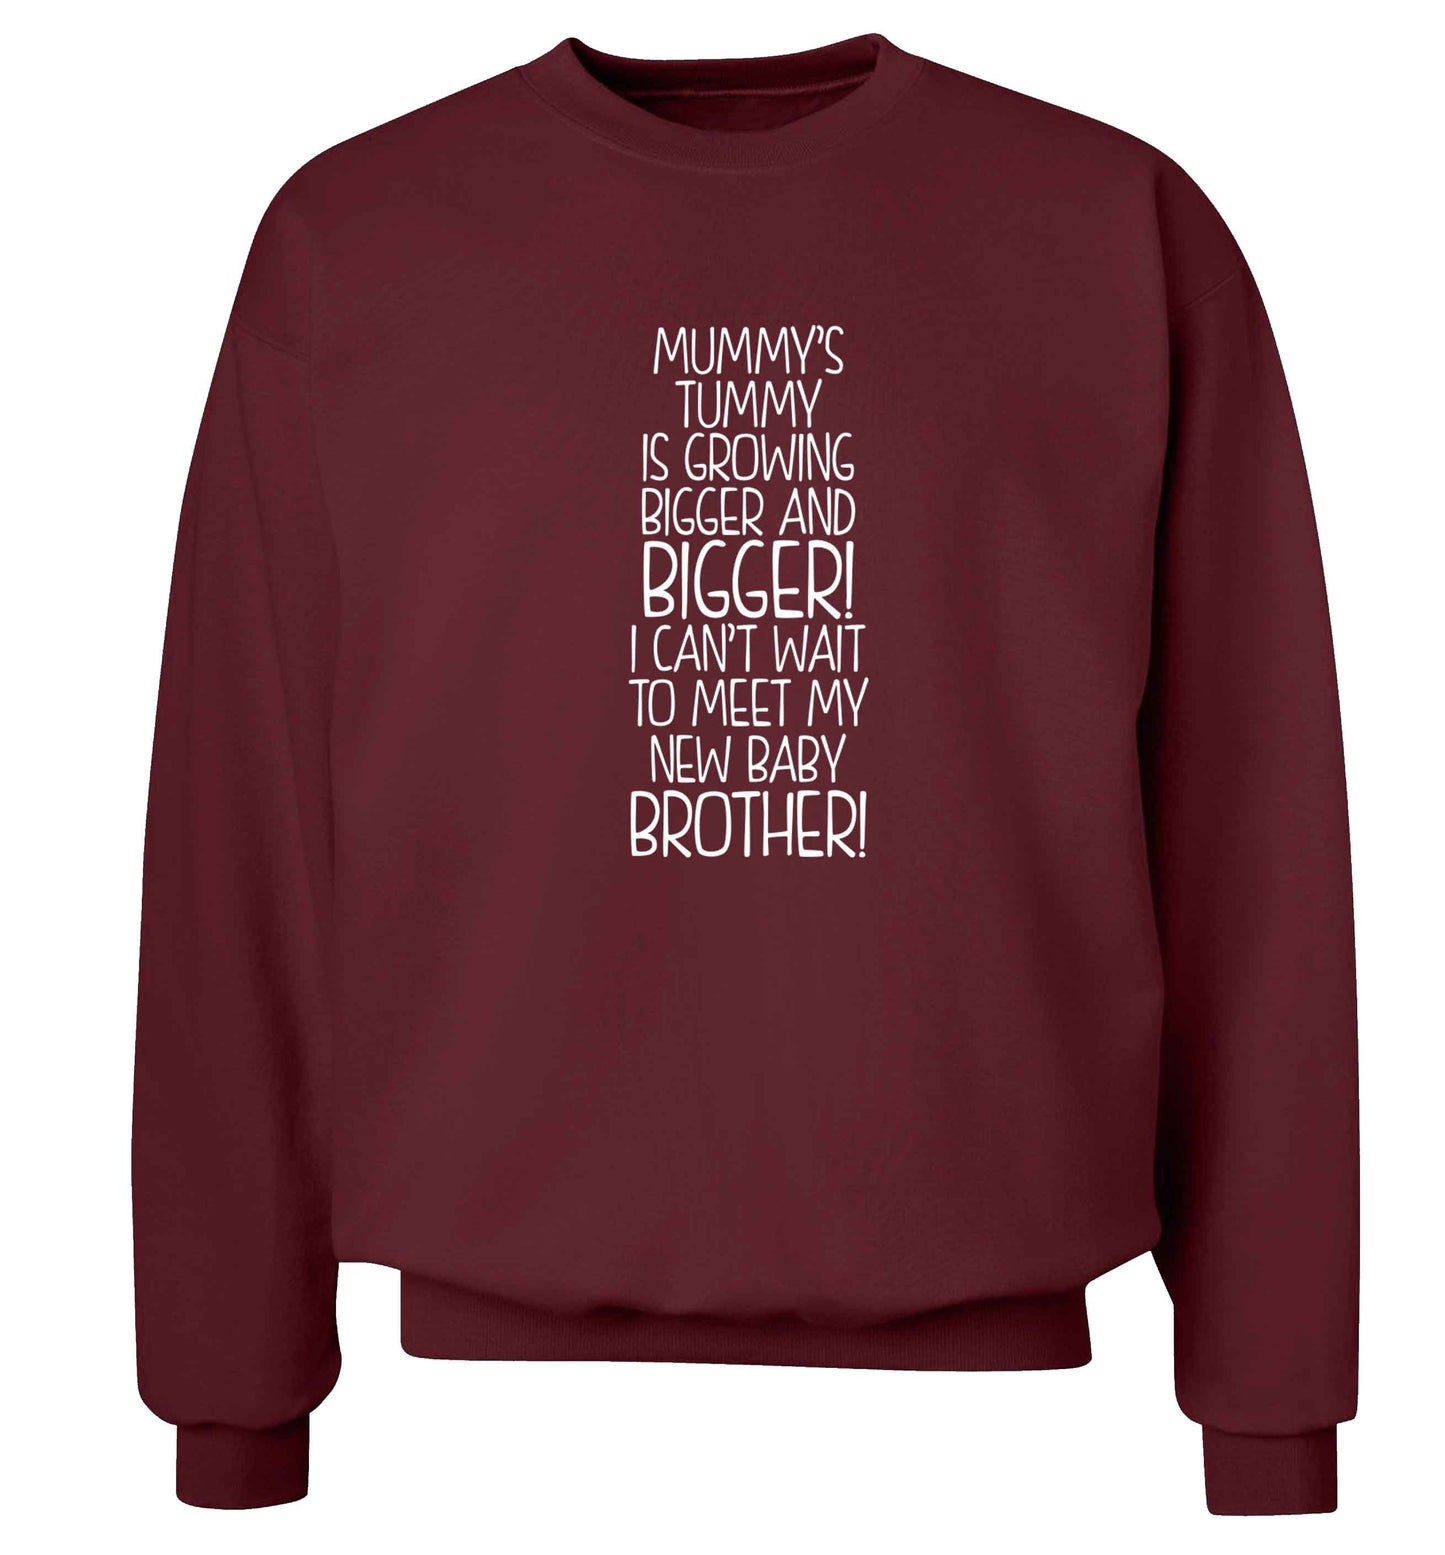 Mummy's tummy is growing bigger and bigger I can't wait to meet my new baby brother! Adult's unisex maroon Sweater 2XL